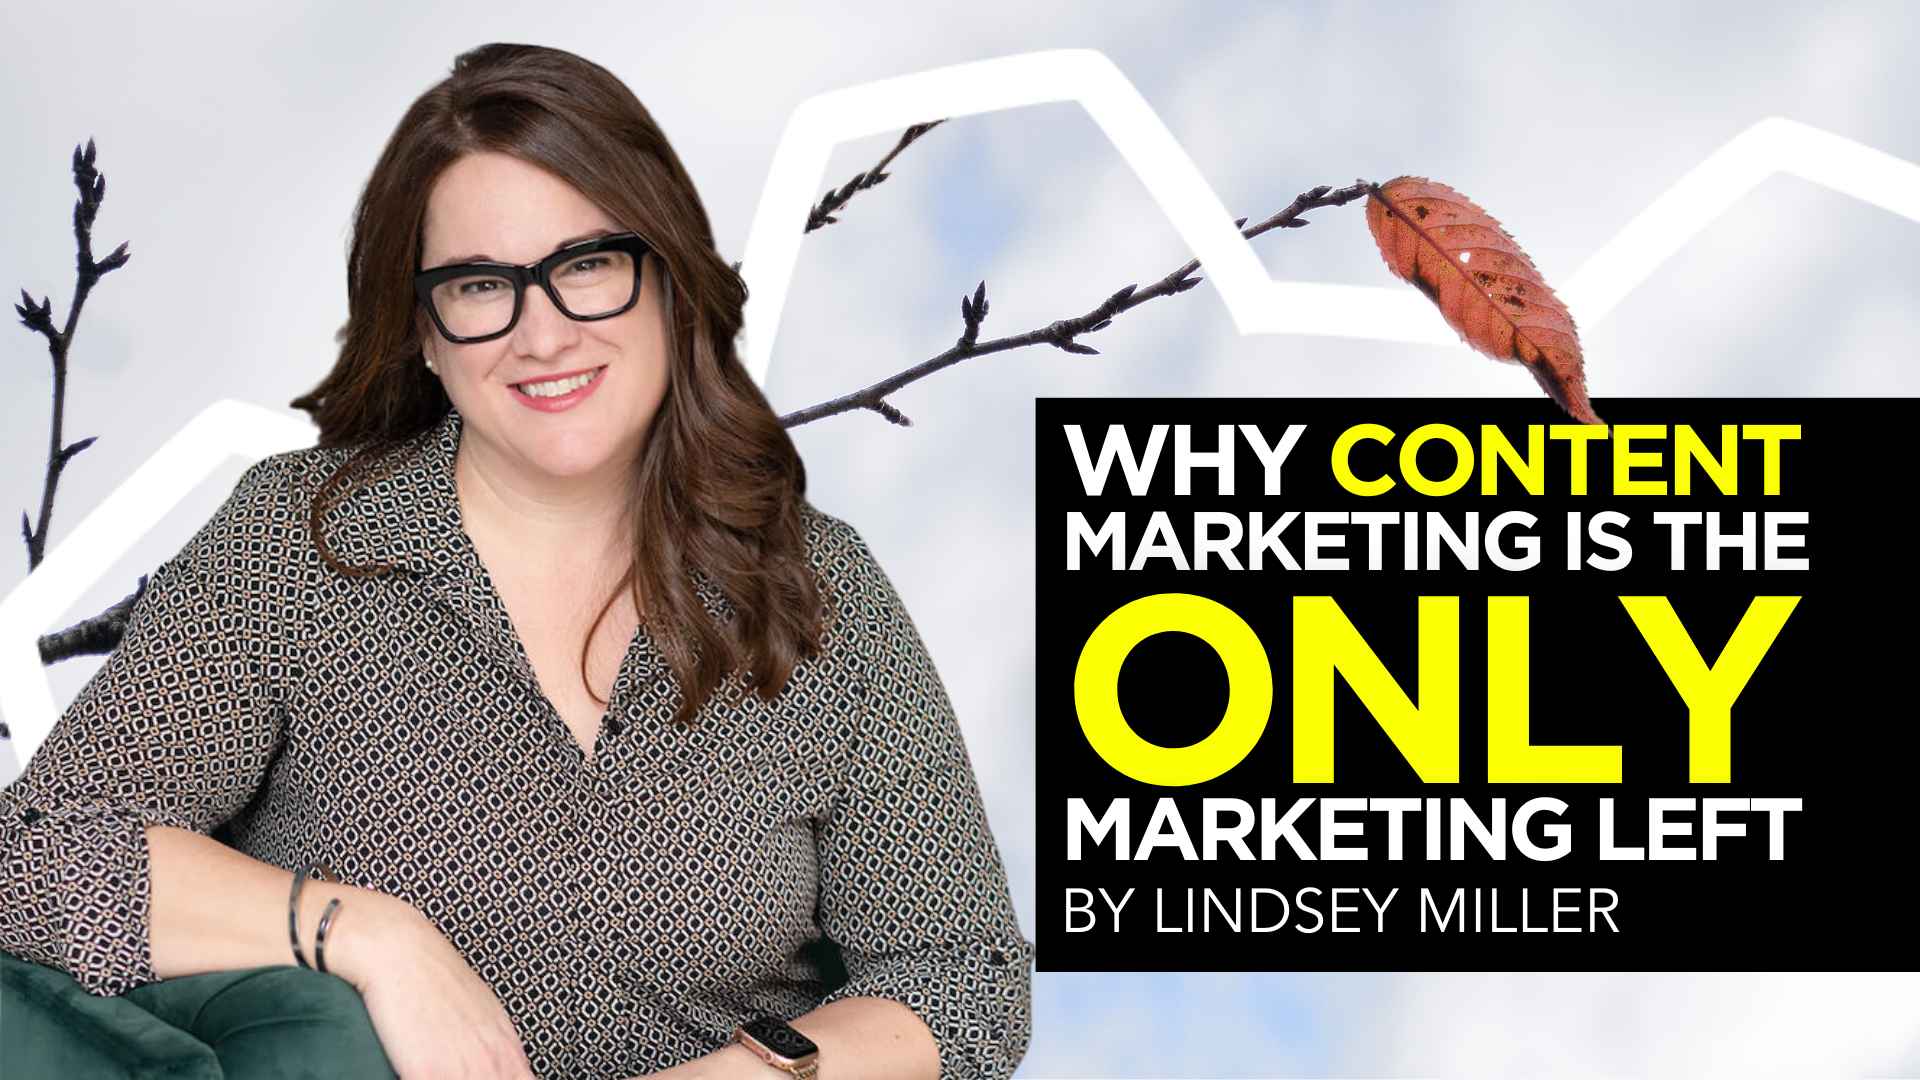 Why Content Marketing is the Only Marketing Left